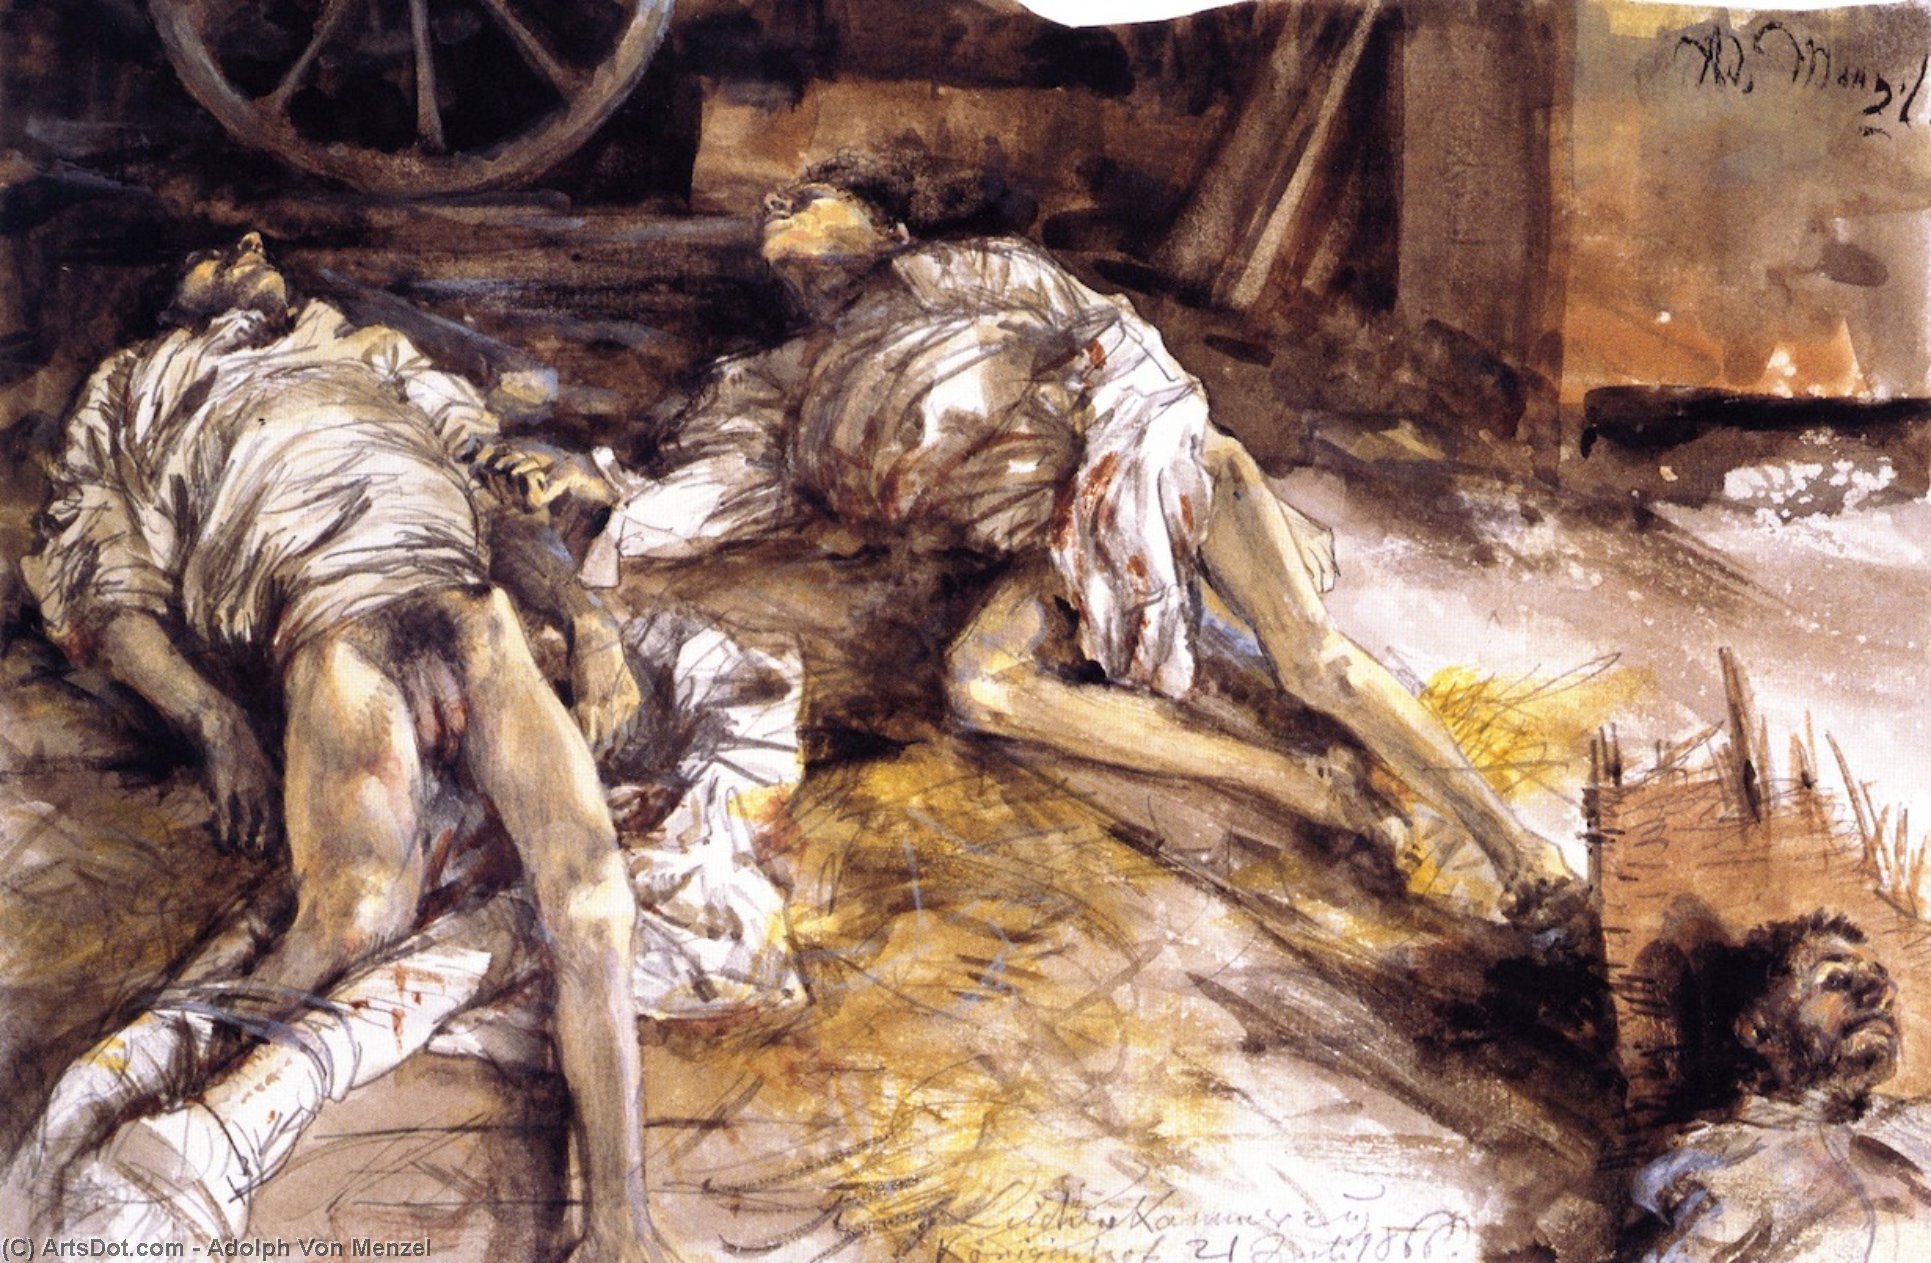 Adolph_von_menzel-two_dead_soldiers_in_a_barn.jpeg